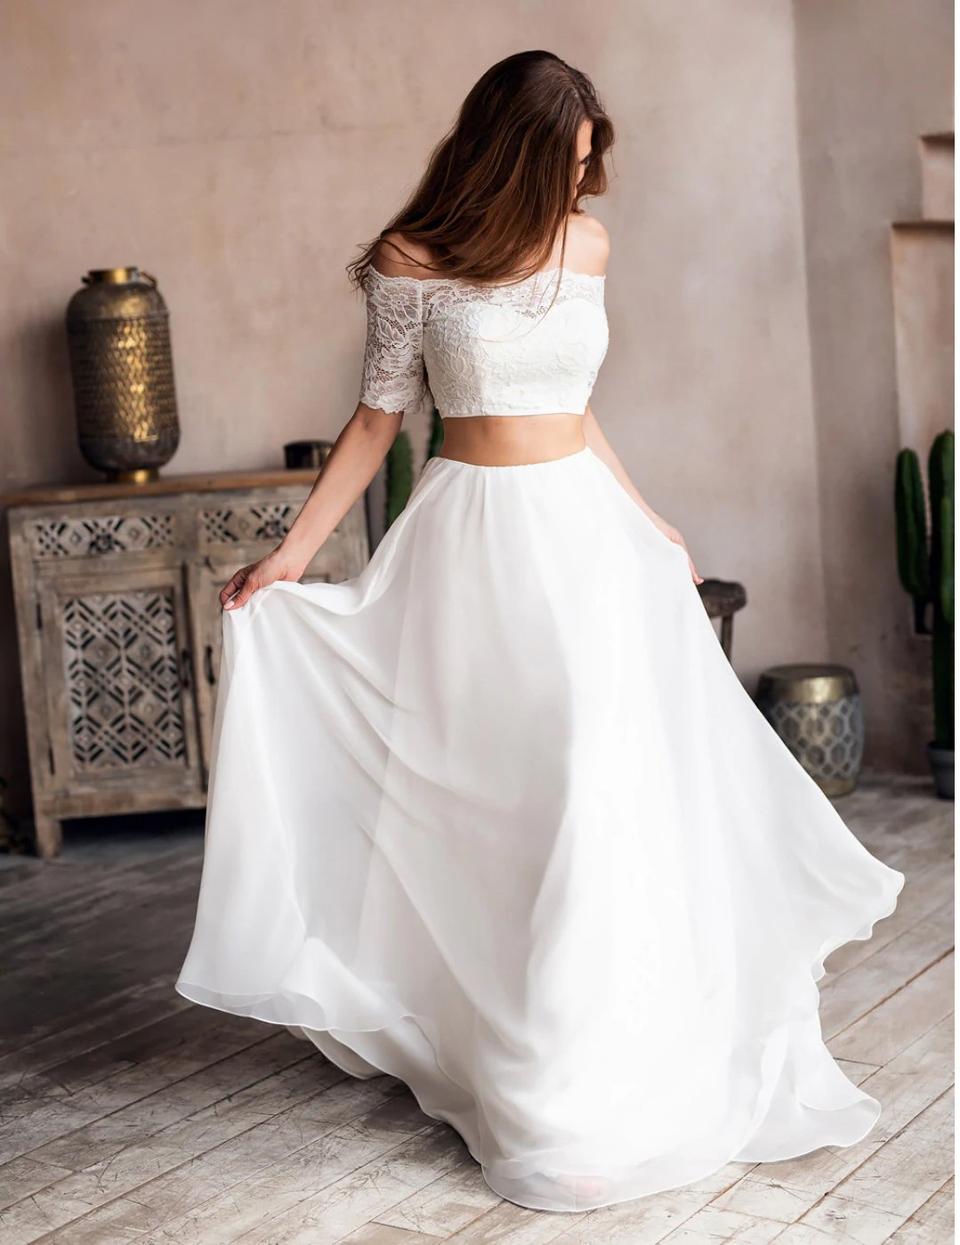 39 Best Two-Piece Wedding Dresses & Bridal Separates for 2022 - hitched ...